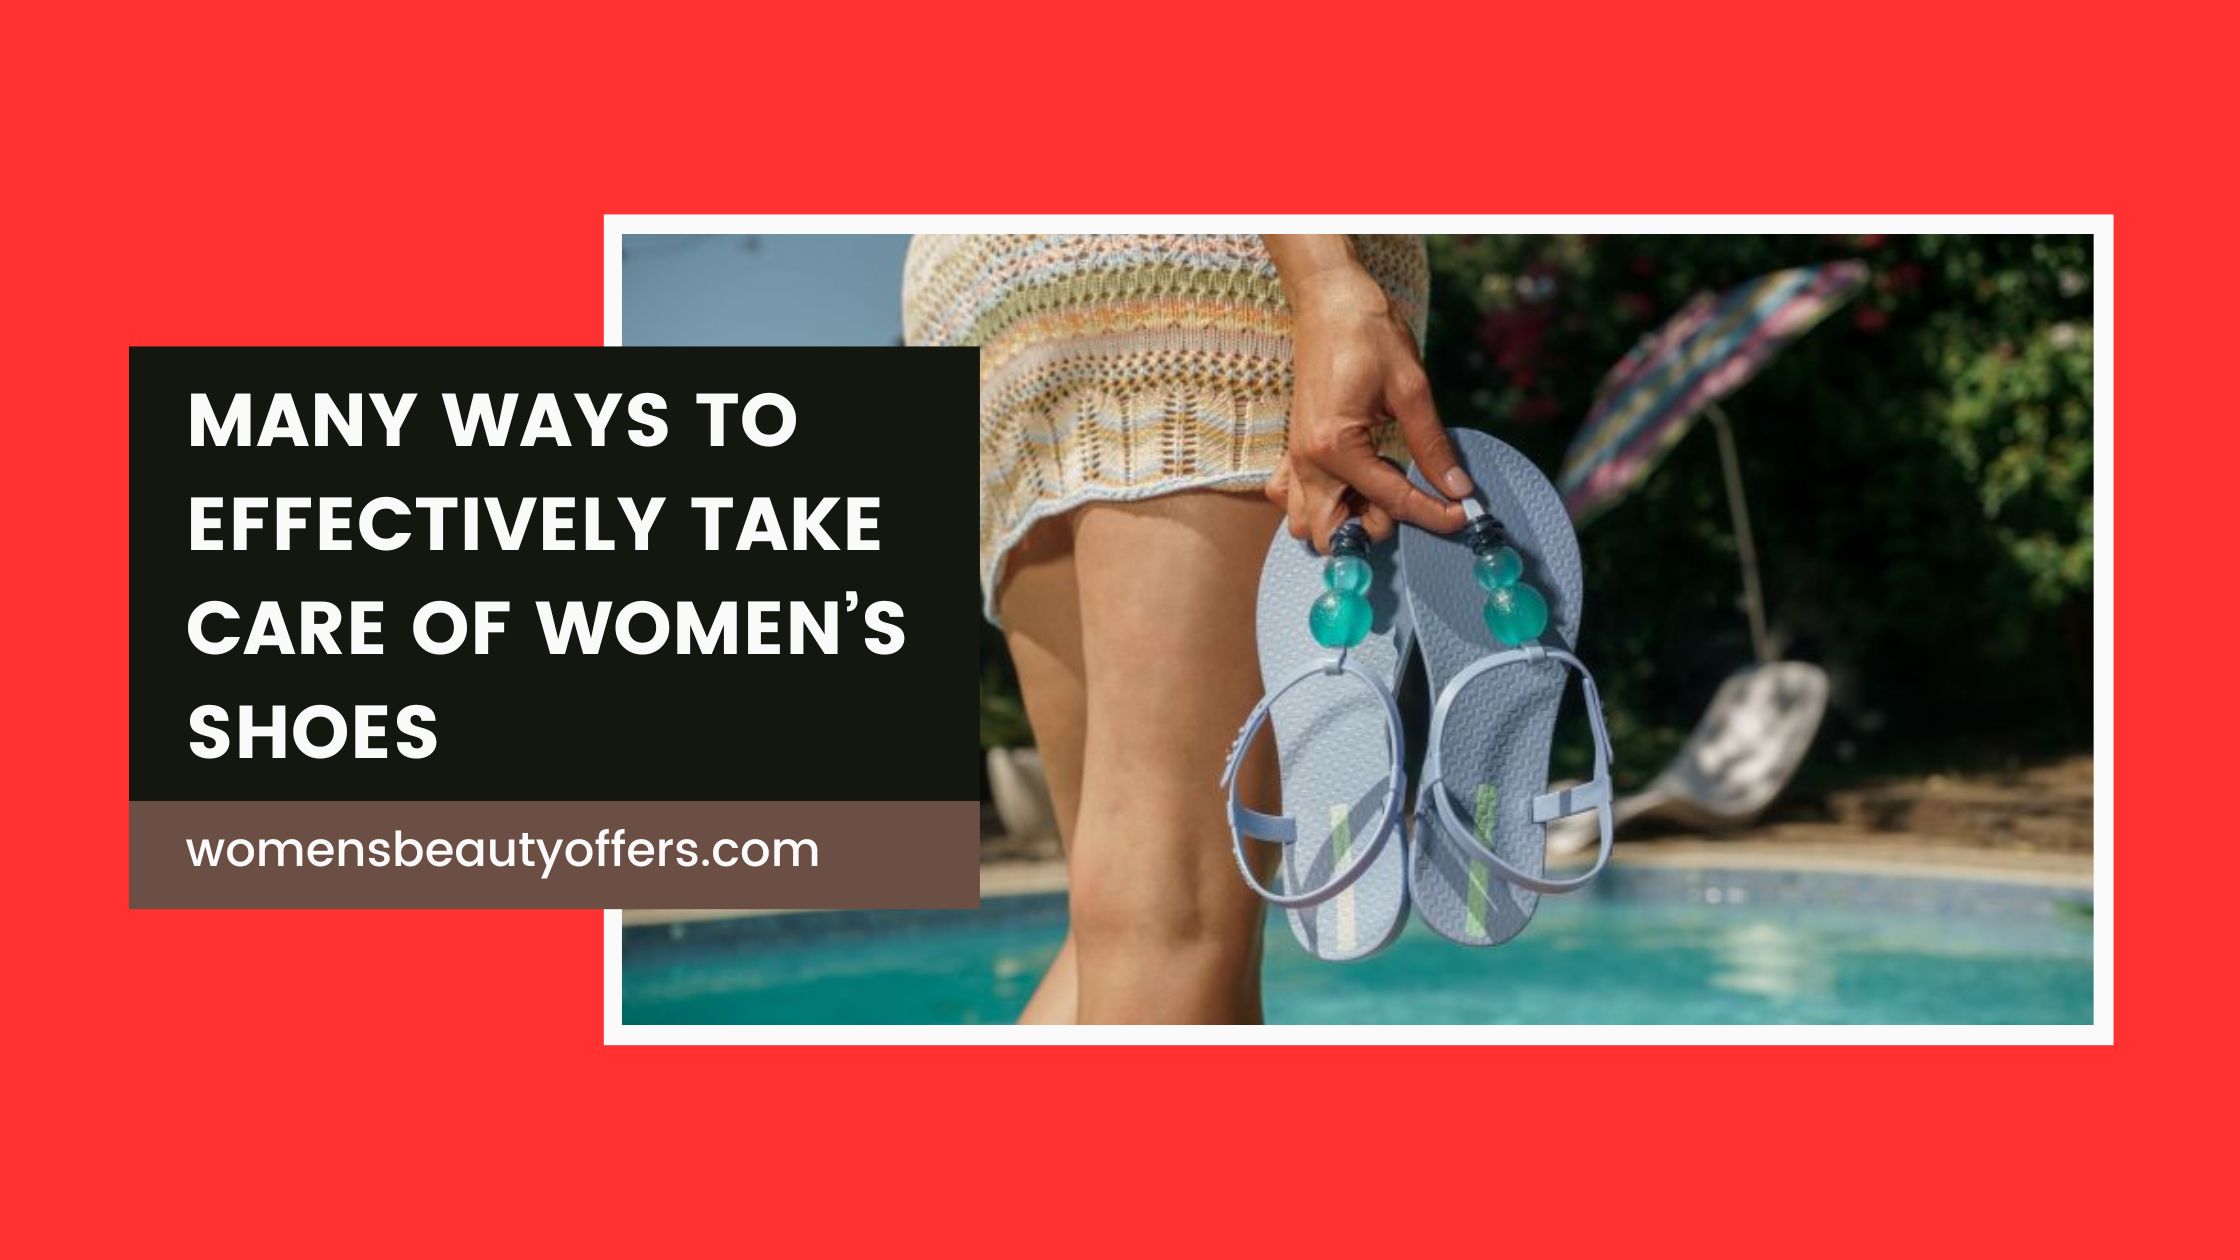 Many ways to effectively take care of women’s shoes